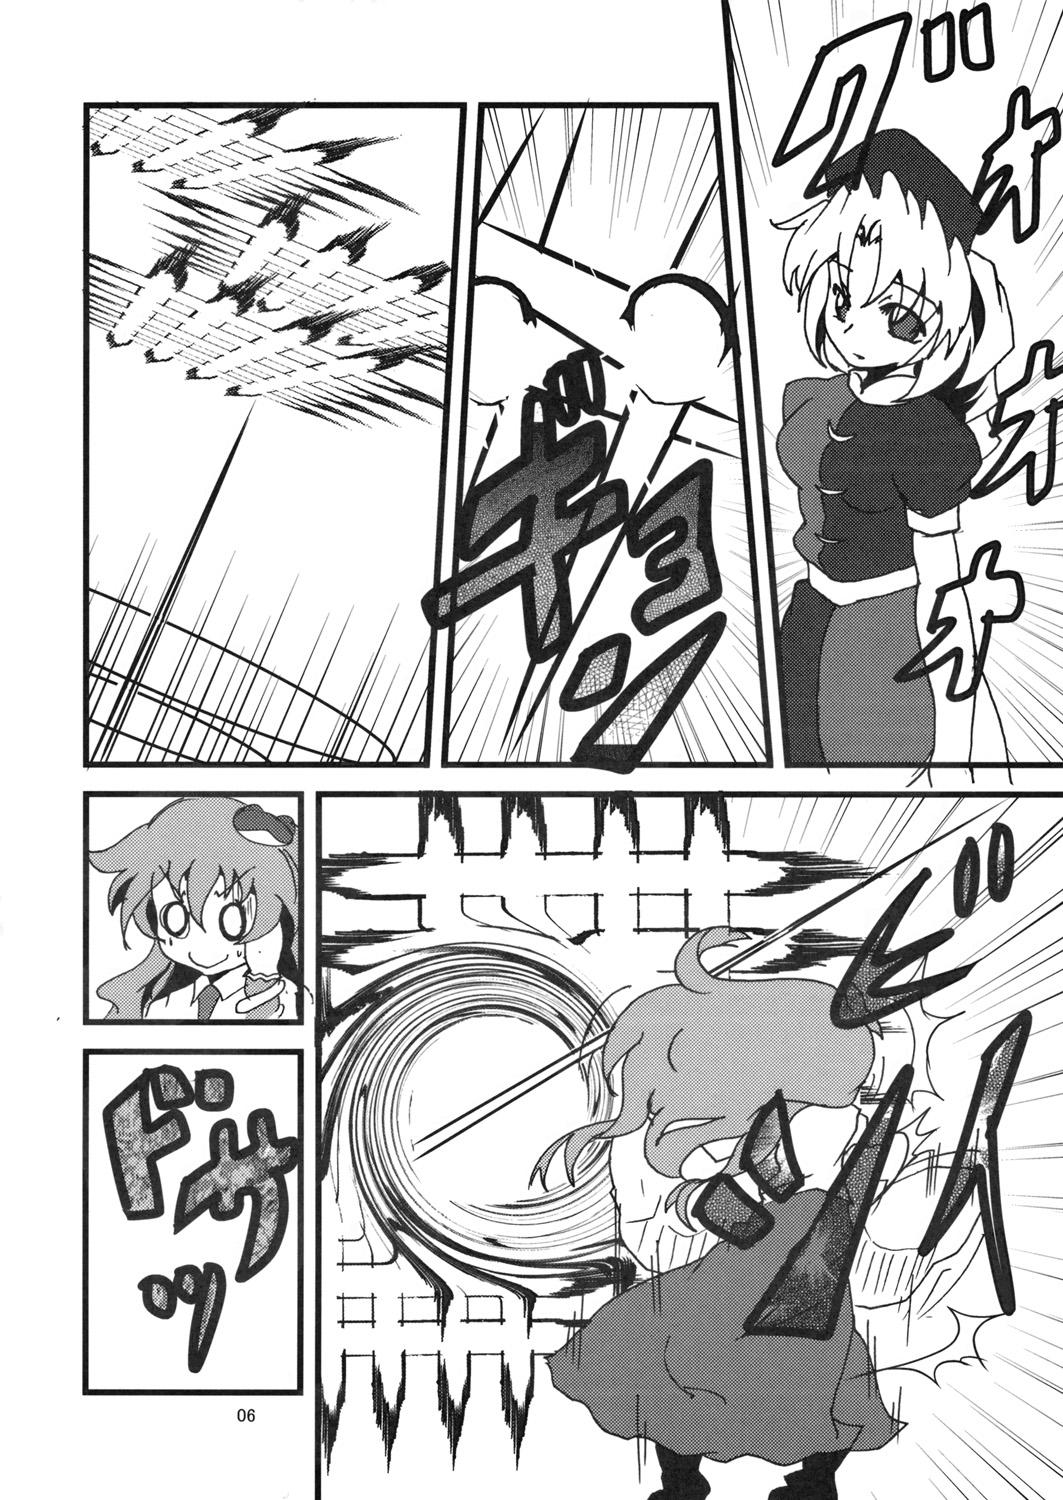 Small Tits 兎と巫女 - Touhou project Girlsfucking - Page 5